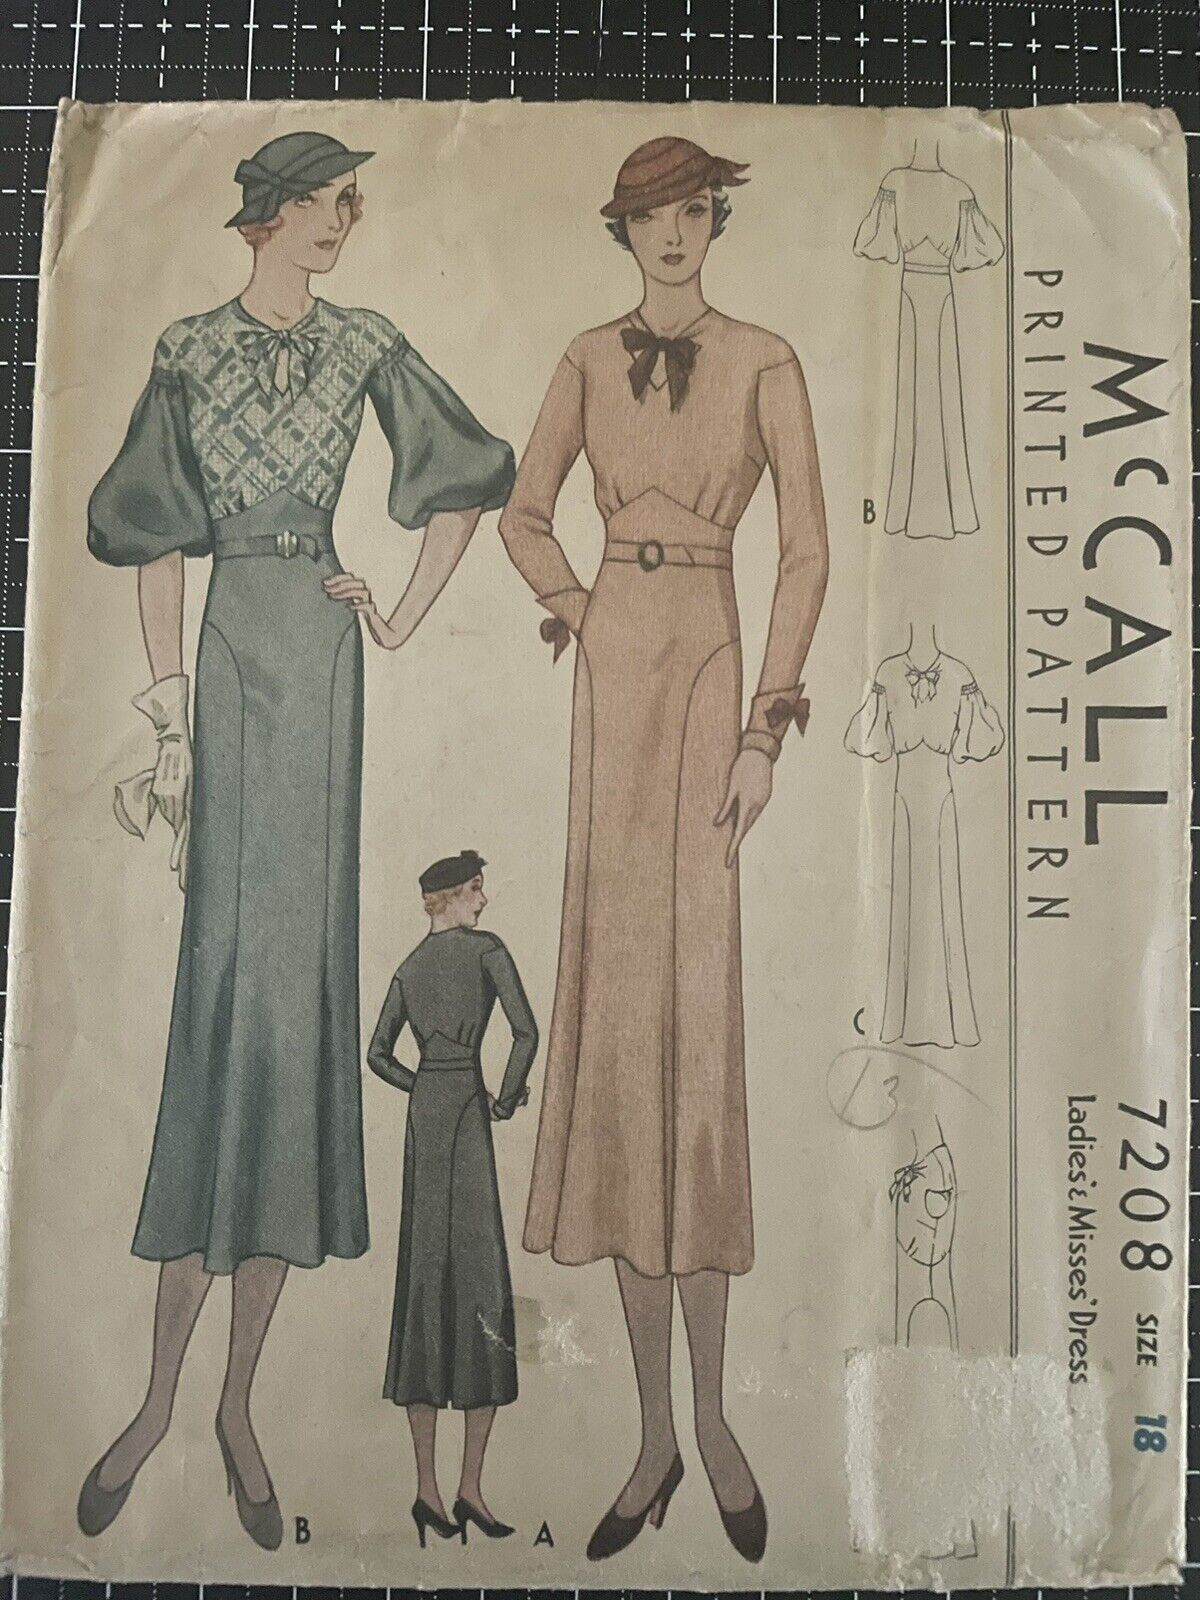 Vintage 1933 McCall Dress Sewing Pattern #7208 - size 18 - Bust 36- Complete